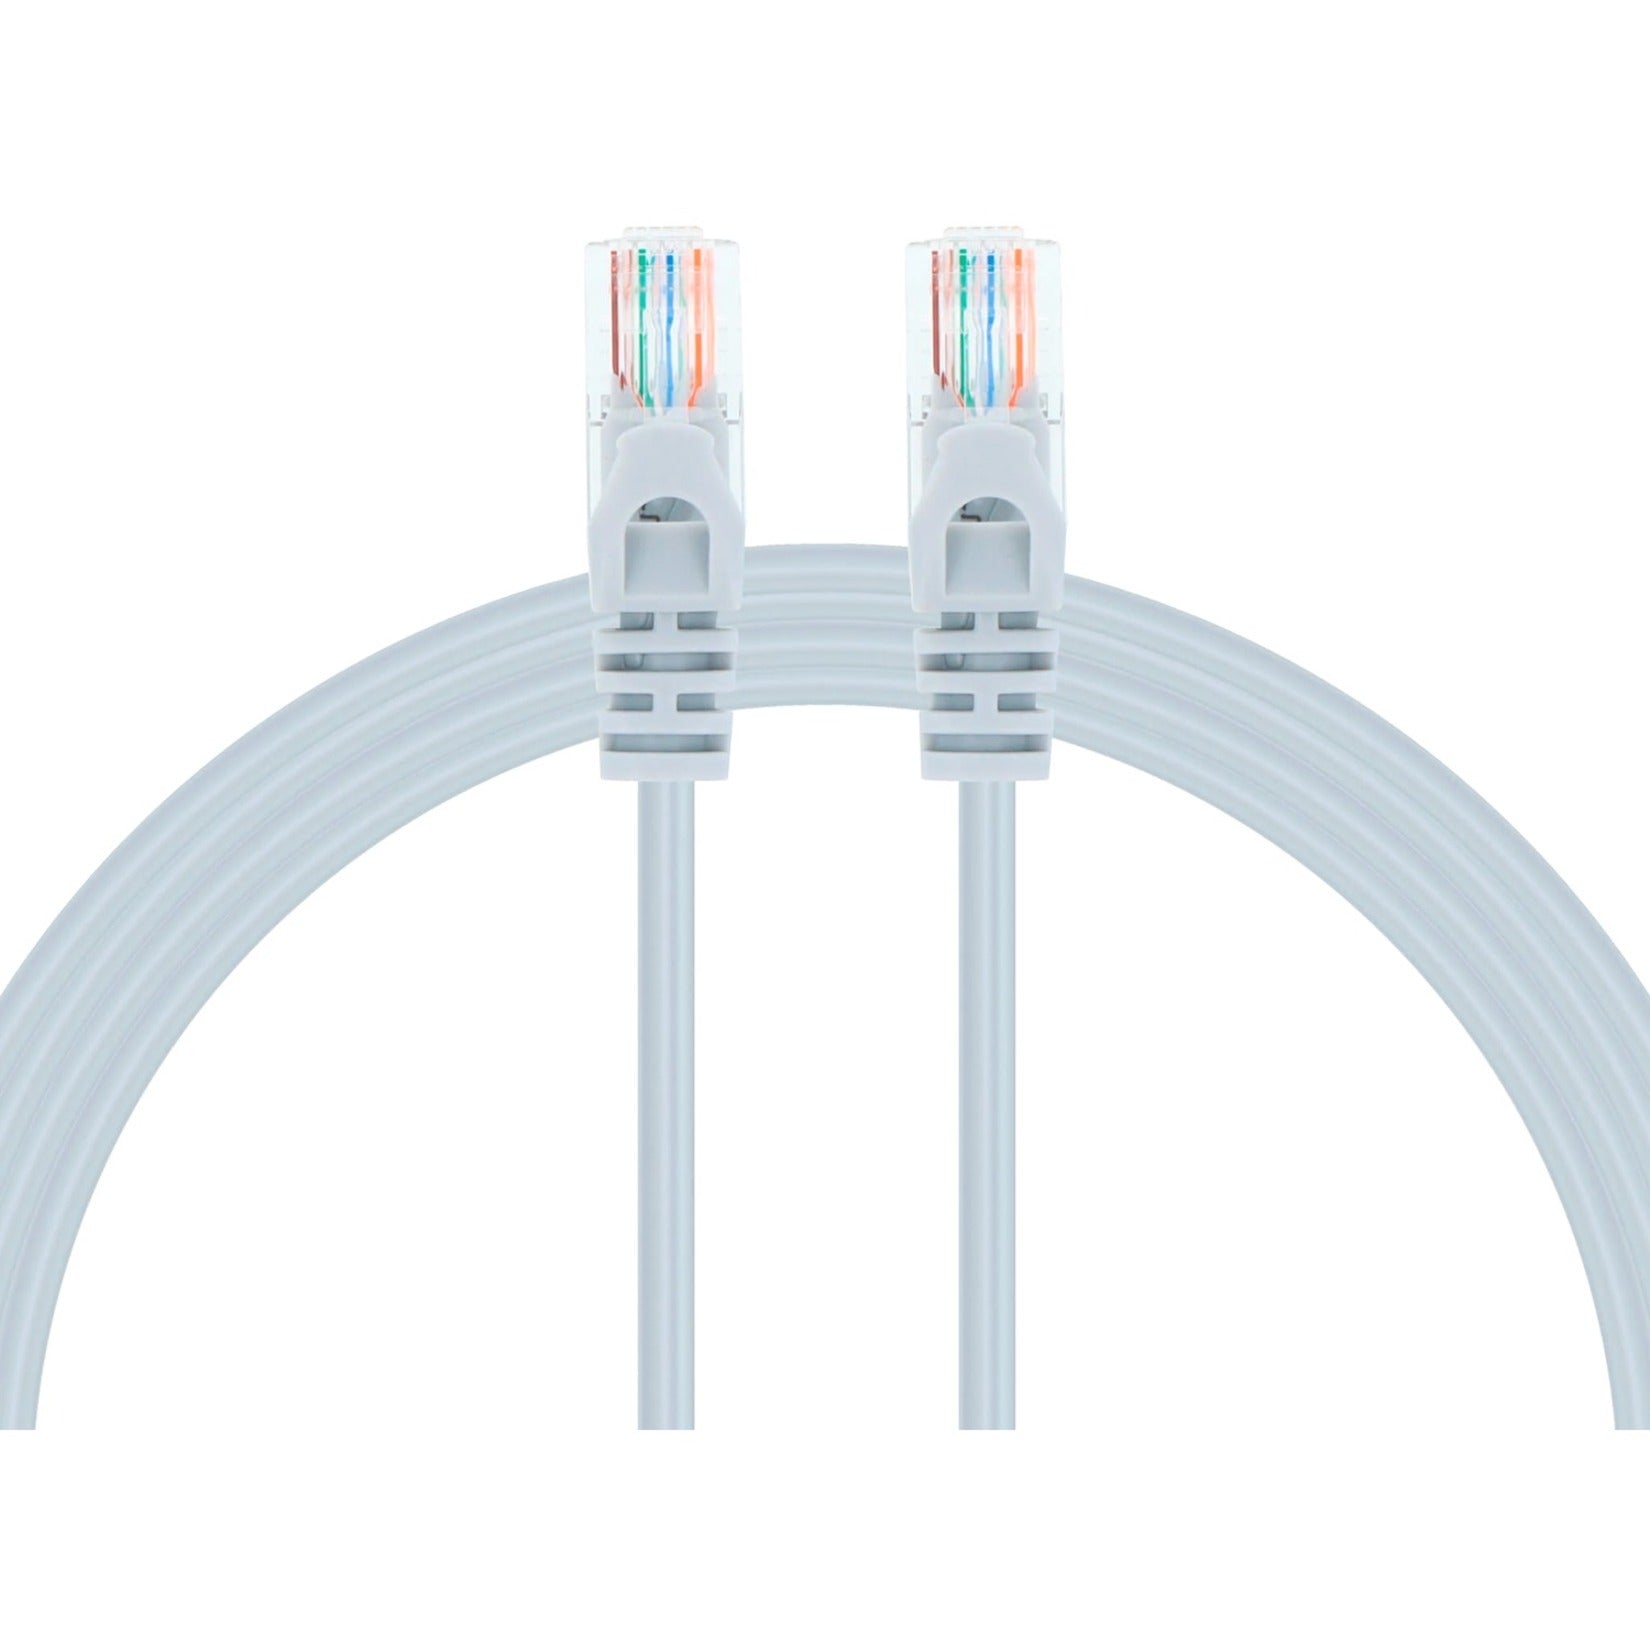 VisionTek 901486 Cat6A UTP Ethernet Cable with Snagless Ends, 7 ft, TAA Compliant